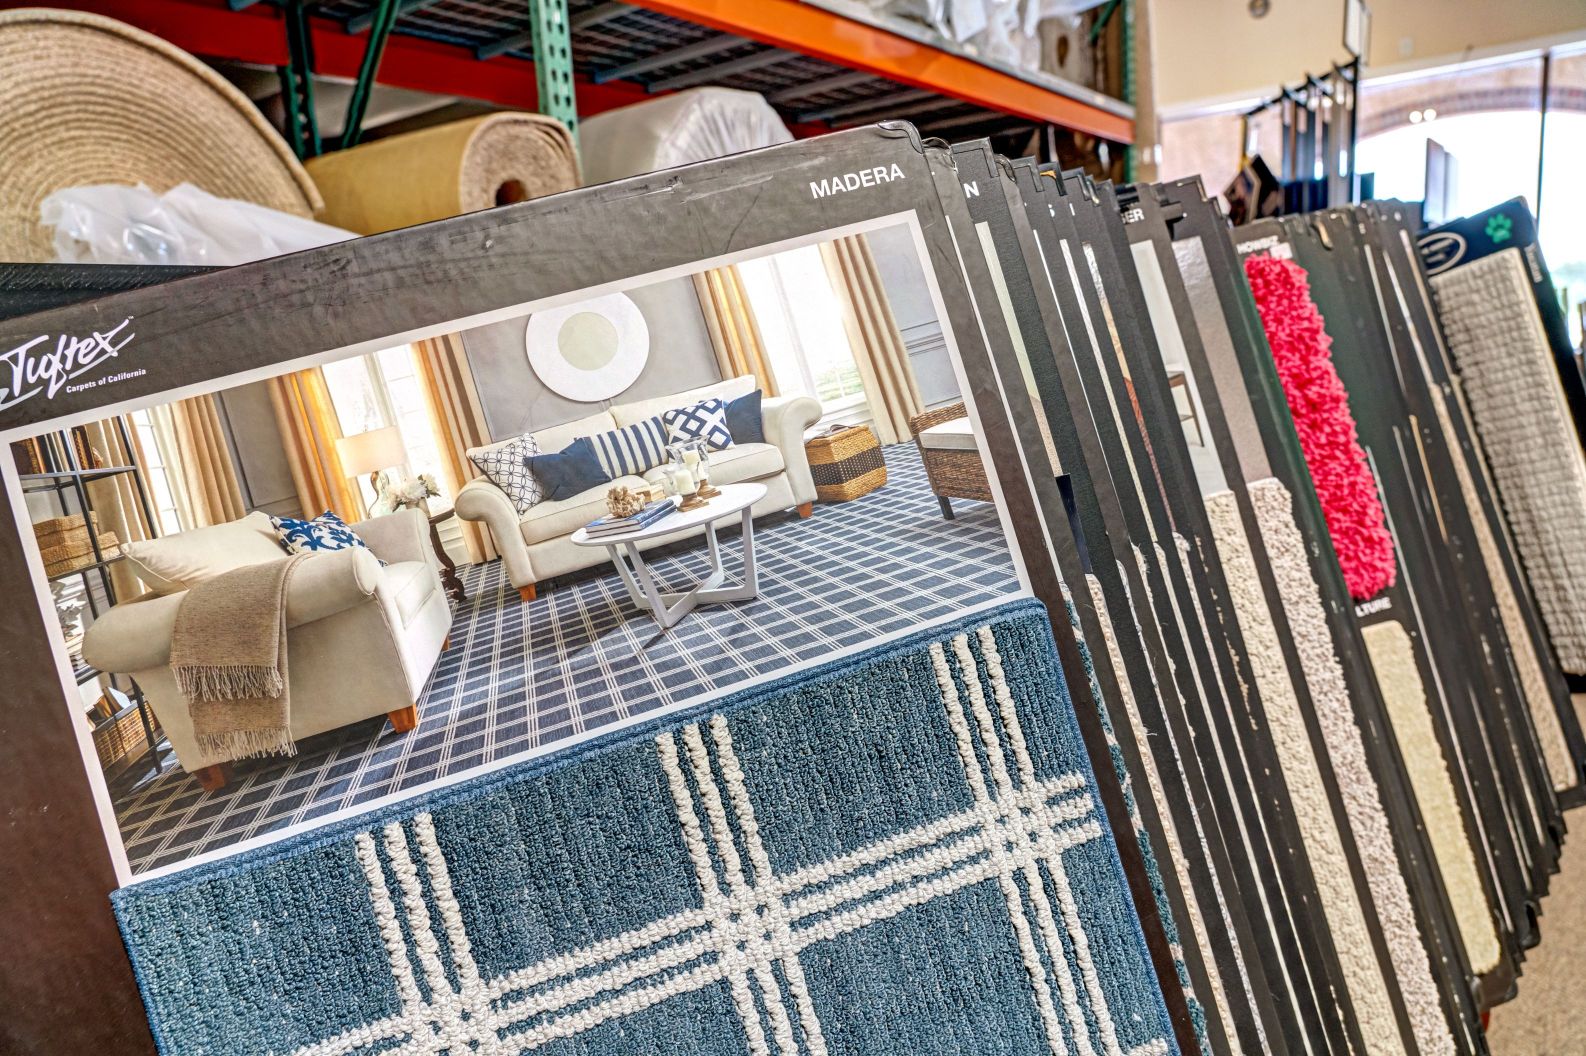 Display of statement carpets. The sample in the front is blue with white grid squares.